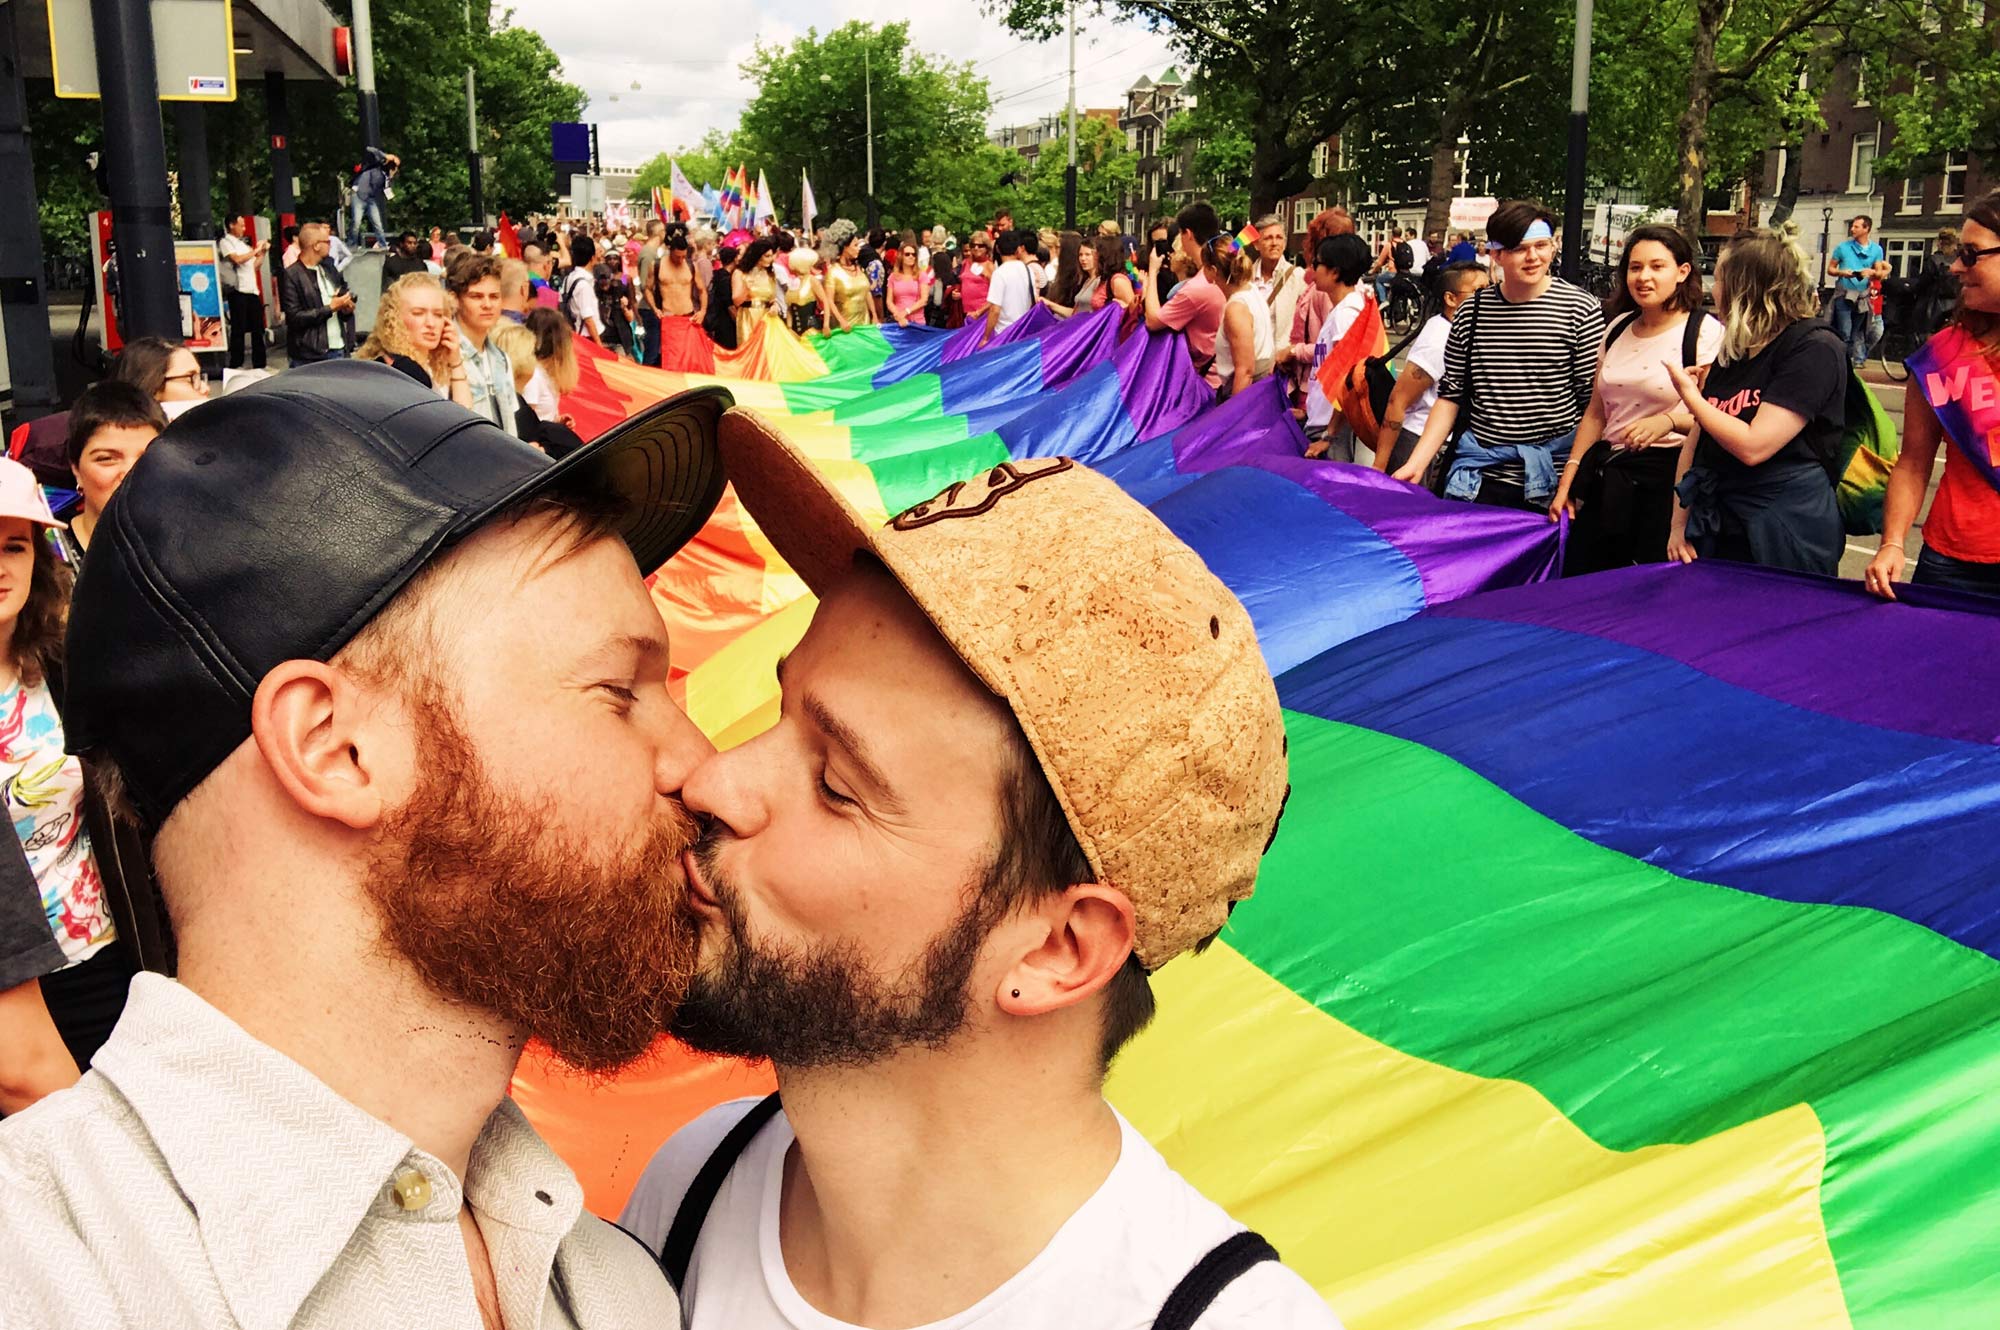 Amsterdam Gay Travel Guide | A Gay Couple’s tips for Holland’s Capital City